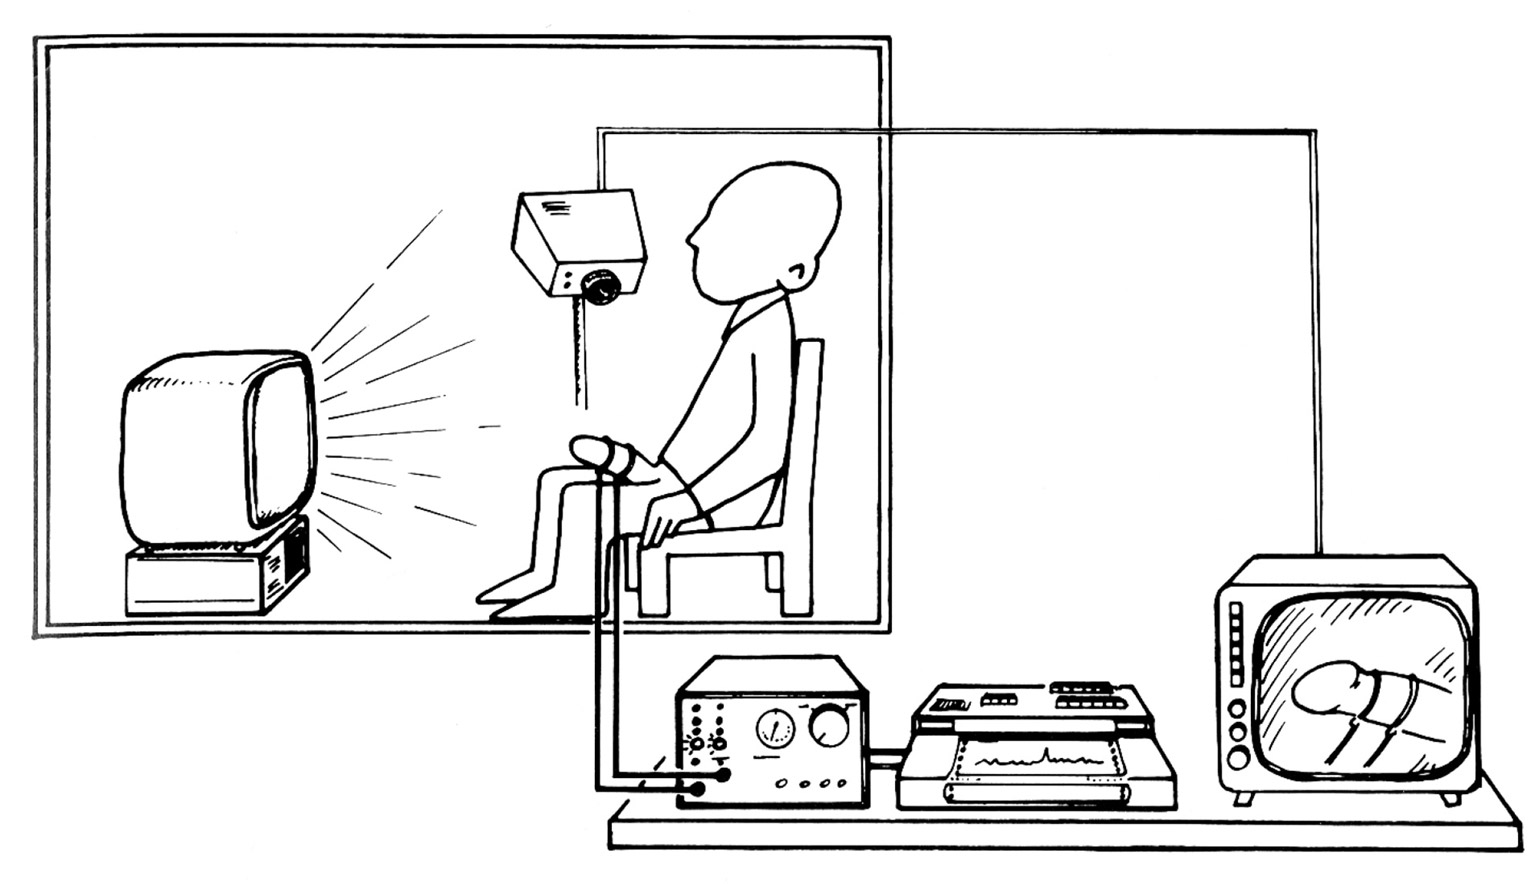 A 1990 drawing showing a subject of impotence testing. The drawing is from the article “Visual Sexual Stimulation Plethysmography: Complementary Test to Nocturnal Penile Plethysmography,” in “Urology” volume thirty-five, number six. 